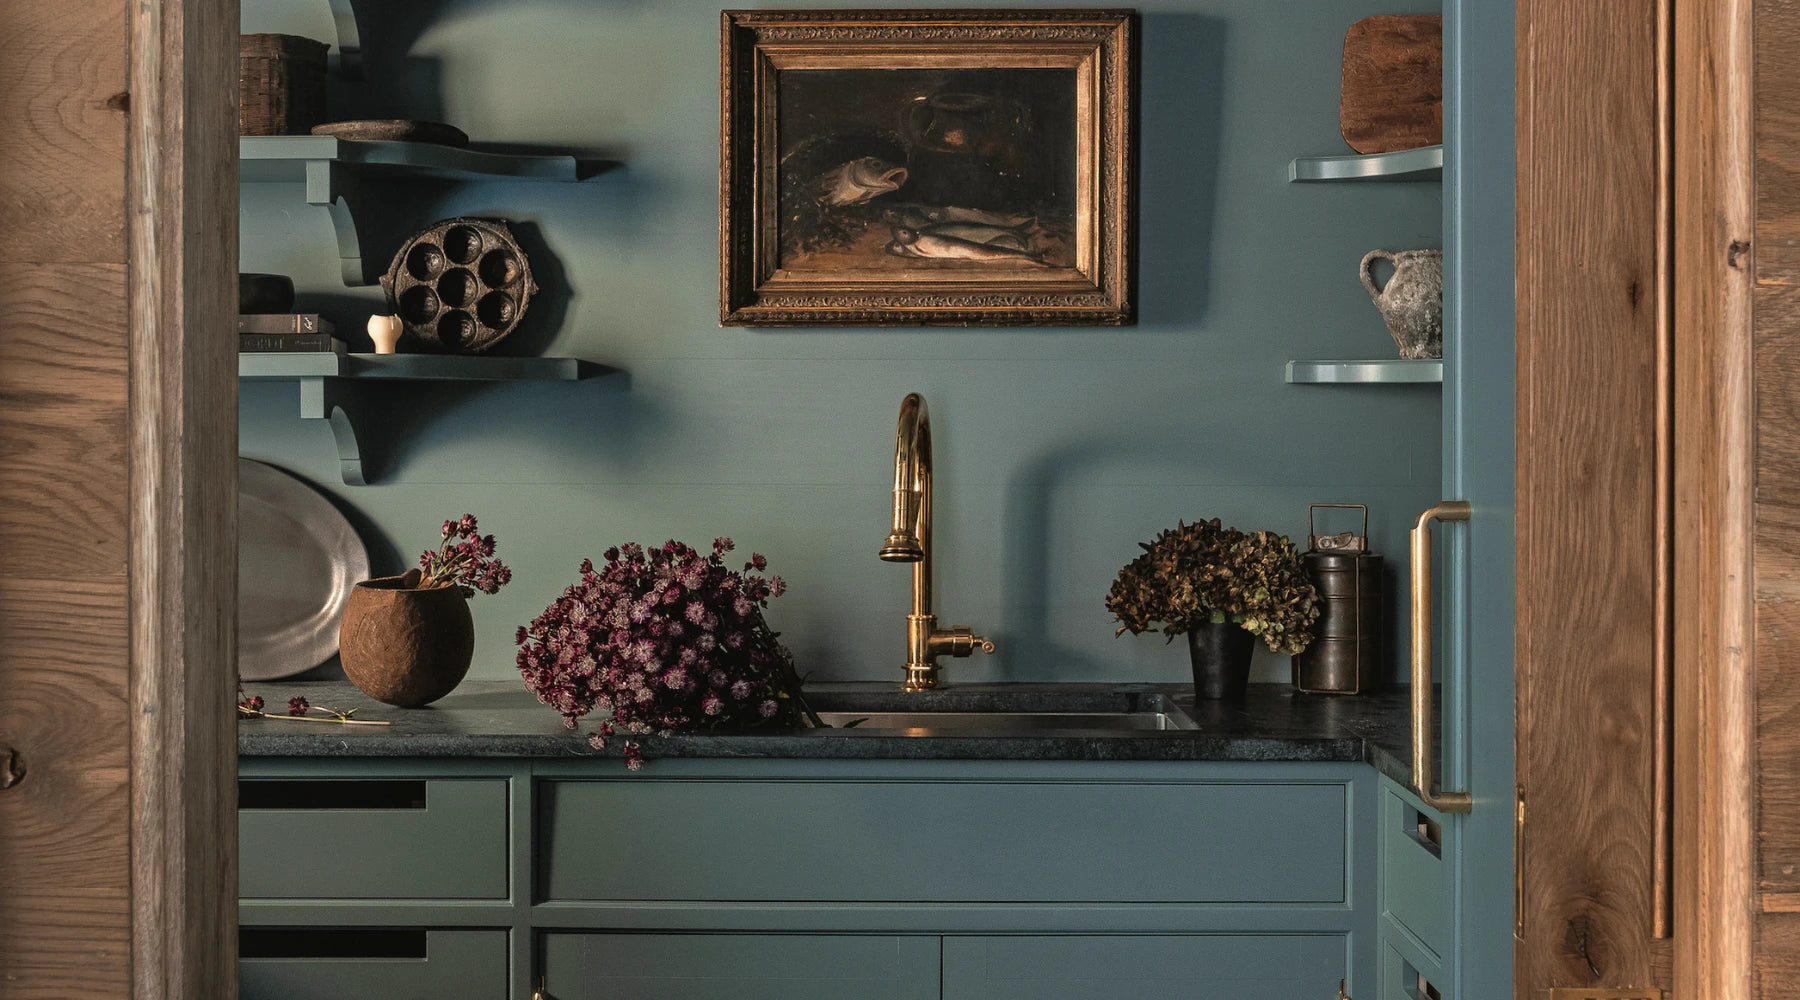 Elegant kitchen interior with teal cabinetry, brass faucet, and decorative items on open shelves inspired by Southern lifestyle.